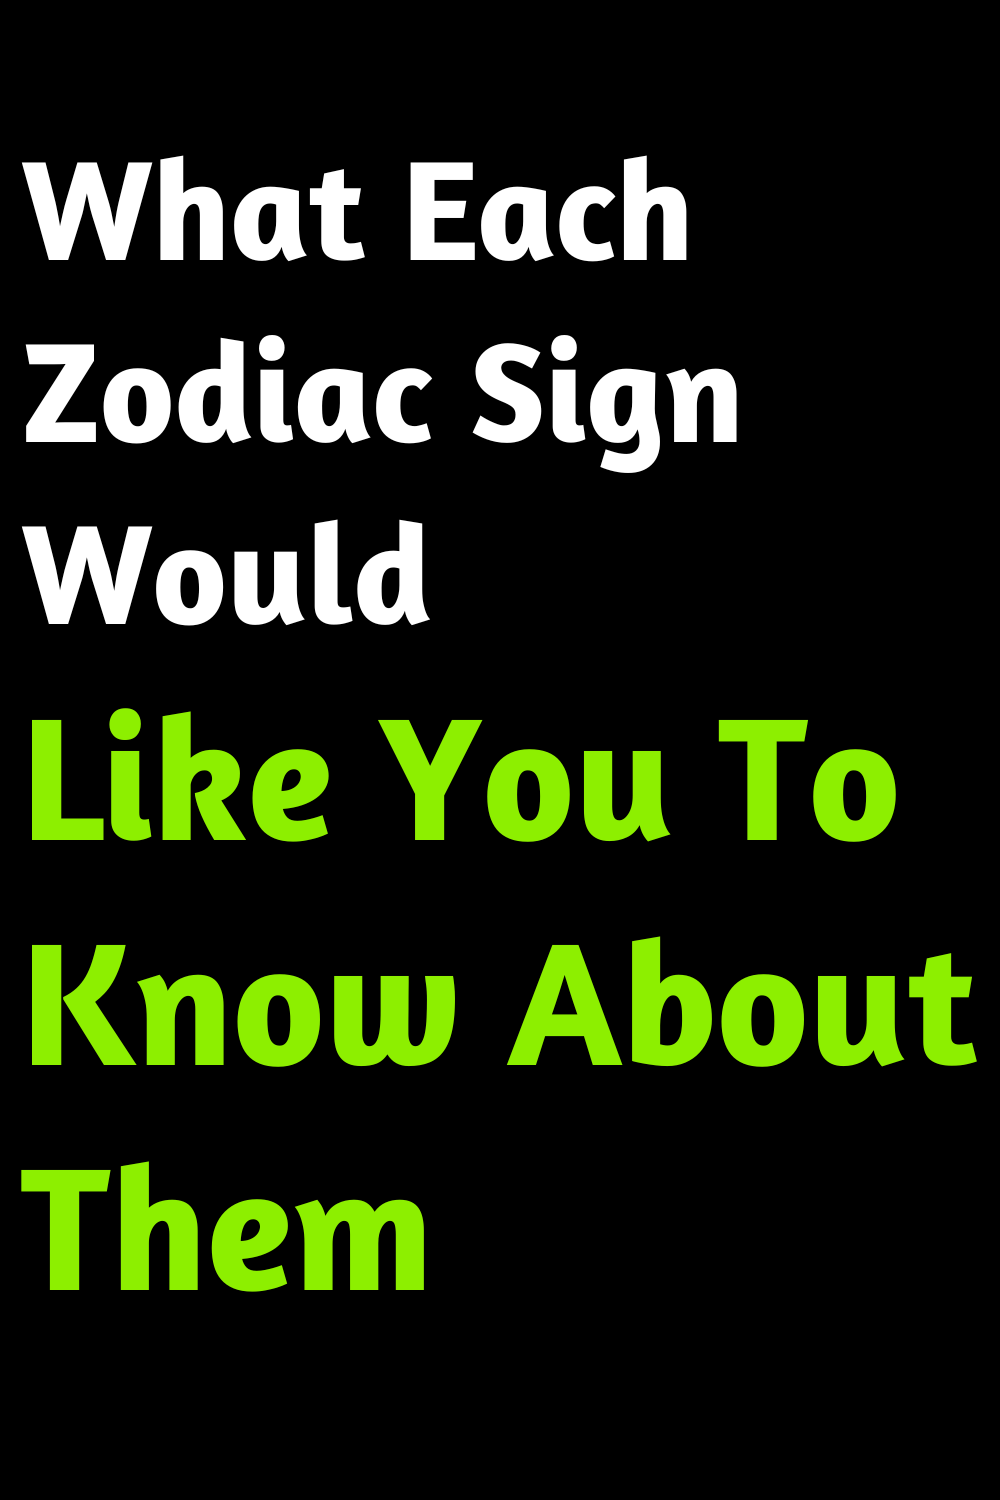 What Each Zodiac Sign Would Like You To Know About Them